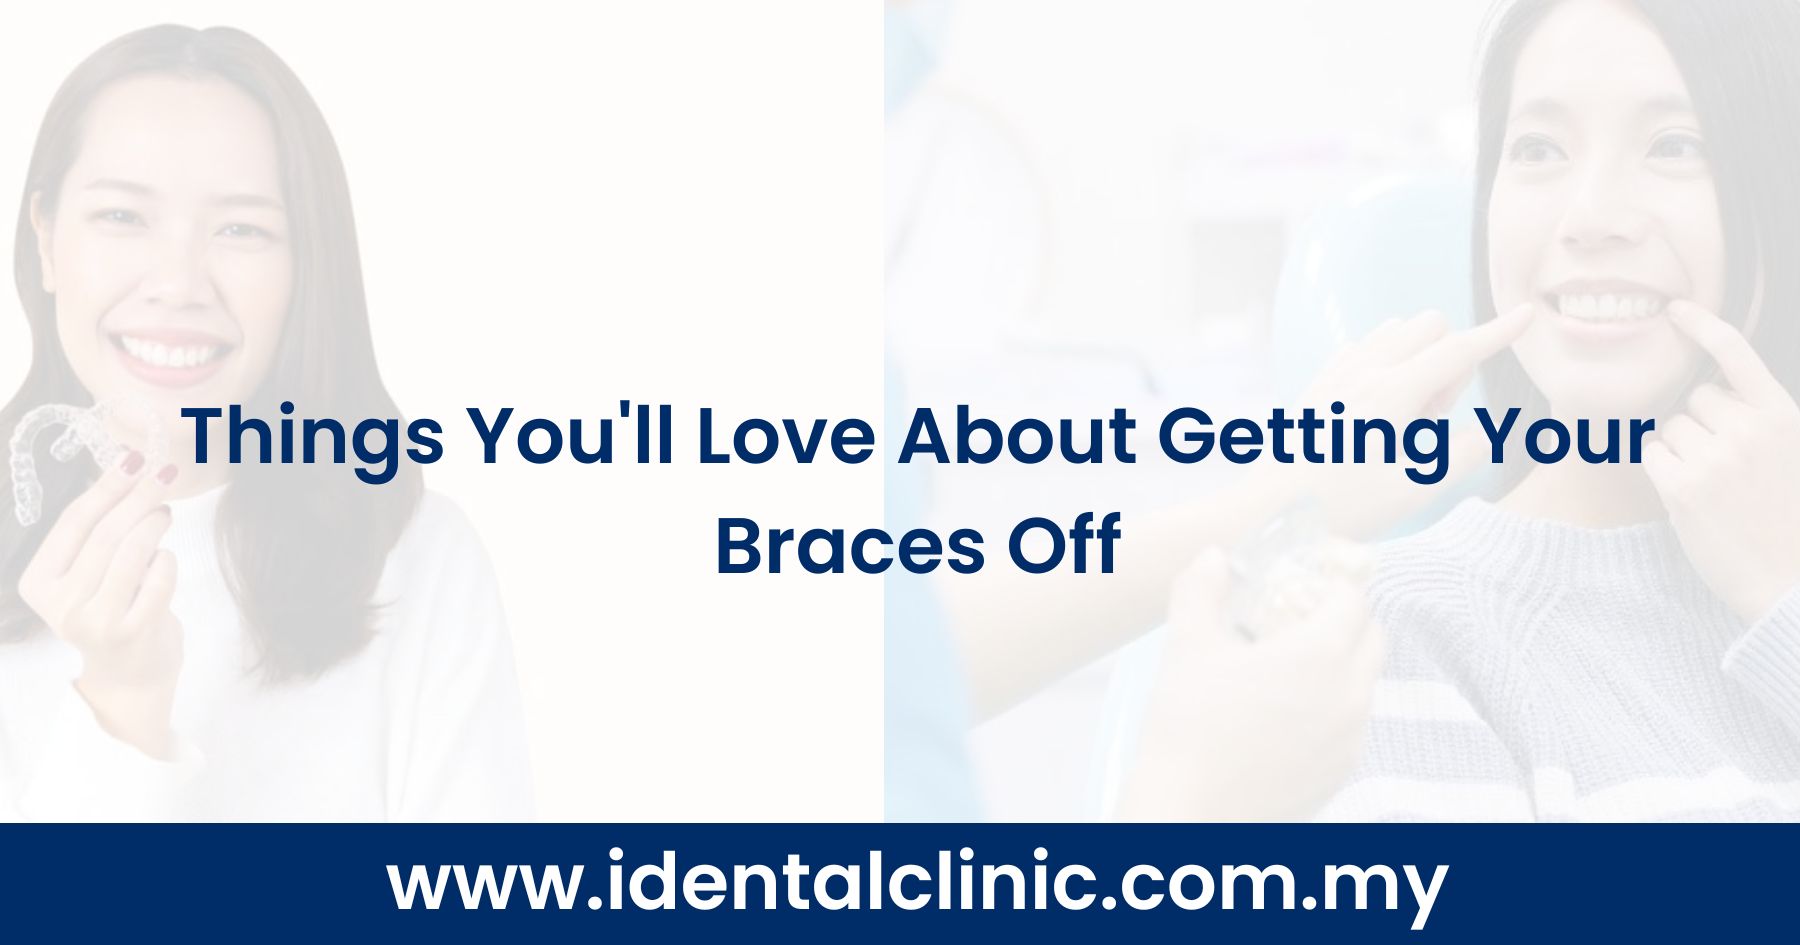 Things You'll Love About Getting Your Braces Off